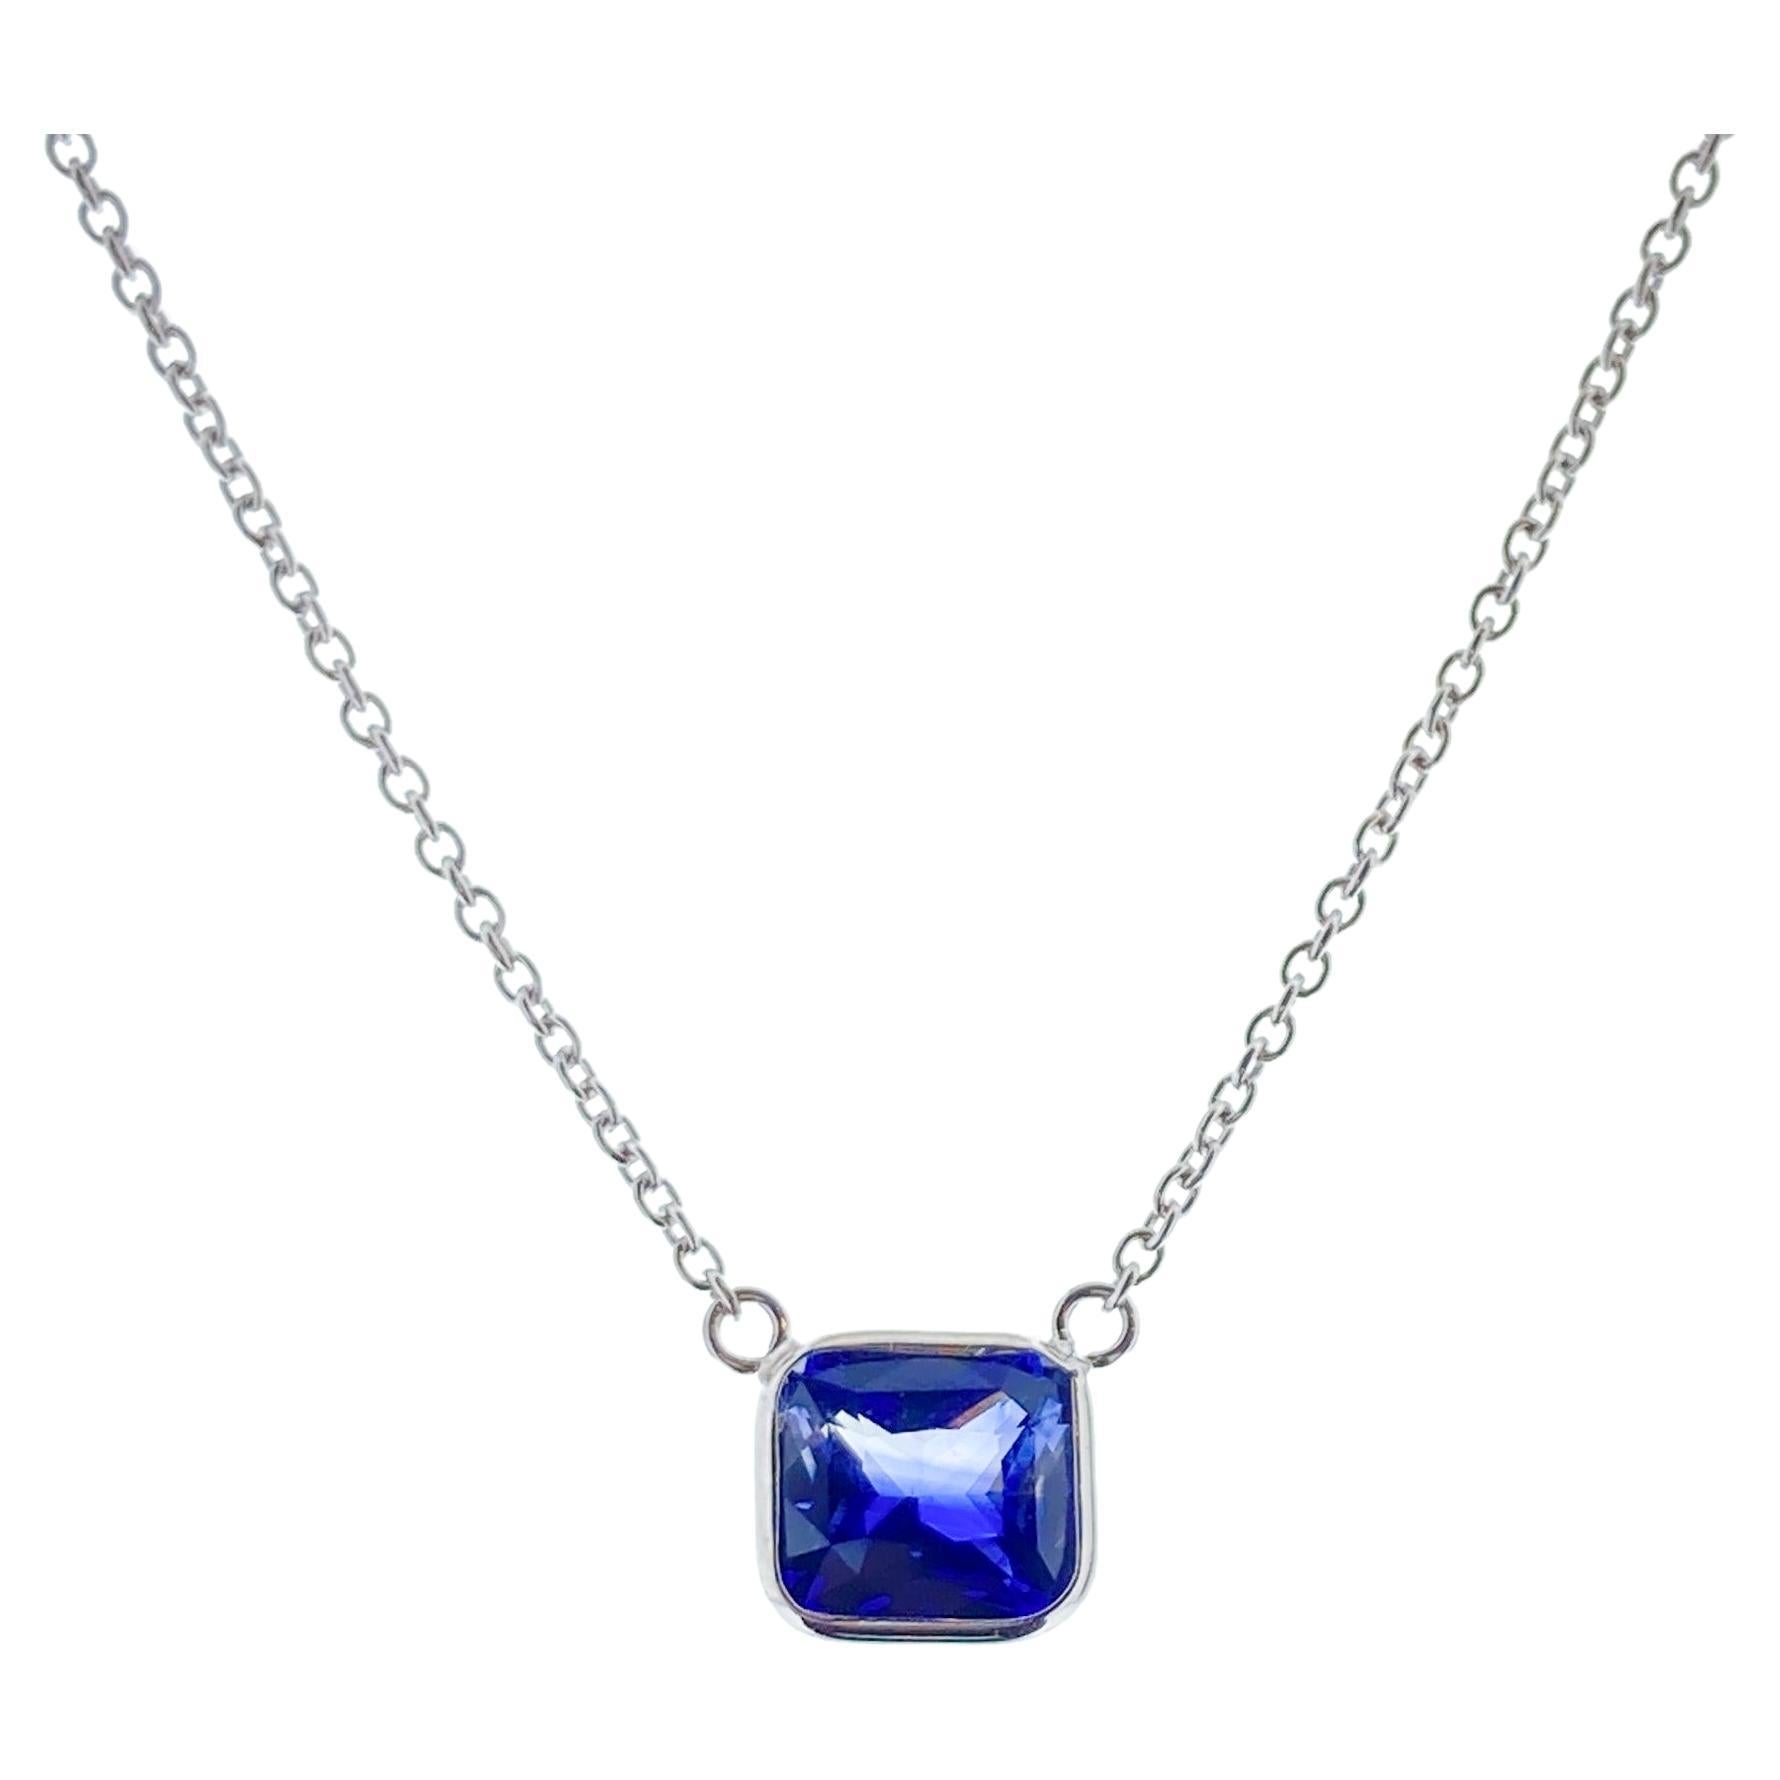 1.80 Carat Blue Octagonal Cut Sapphire Fashion Necklaces In 14K White Gold  For Sale